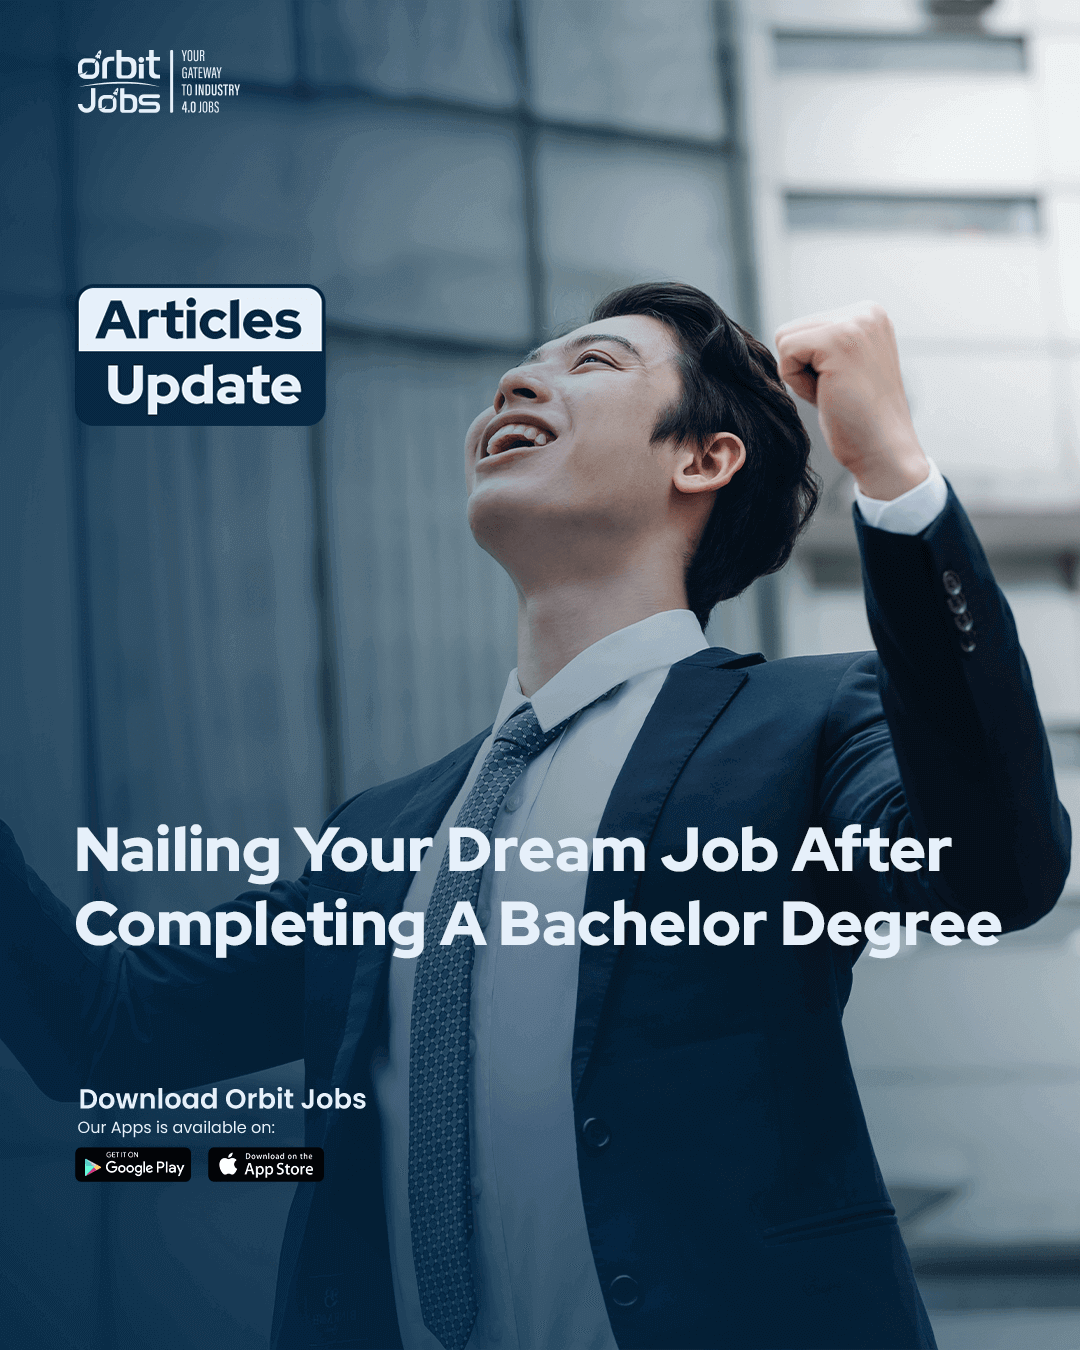 Nailing Your Dream Job After Completing A Bachelor Degree